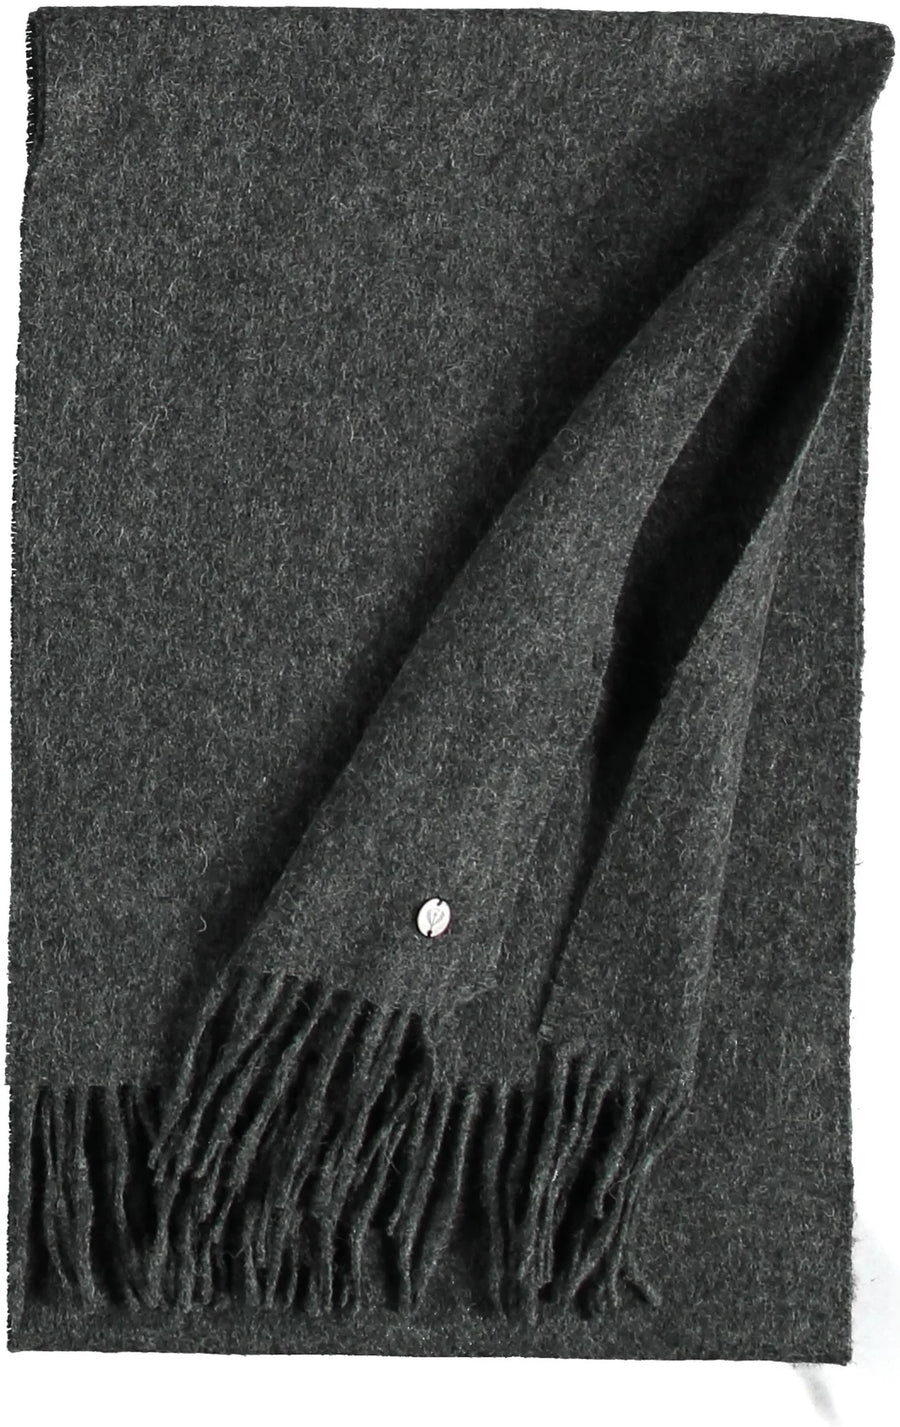 VF627019 Solid Wool/Cashmere Scarf